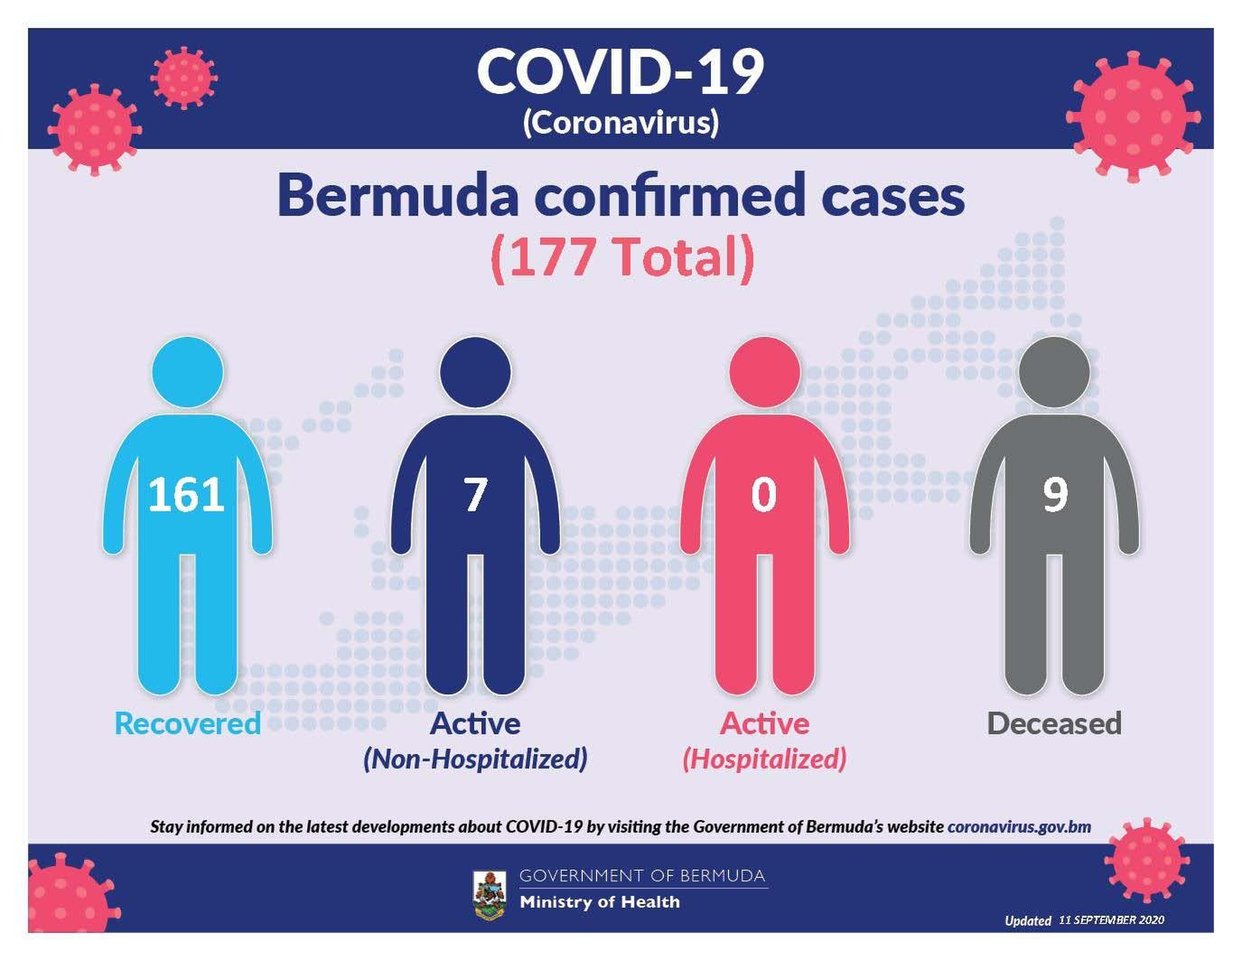 No new COVID-19 cases reported in Bermuda, 11 September